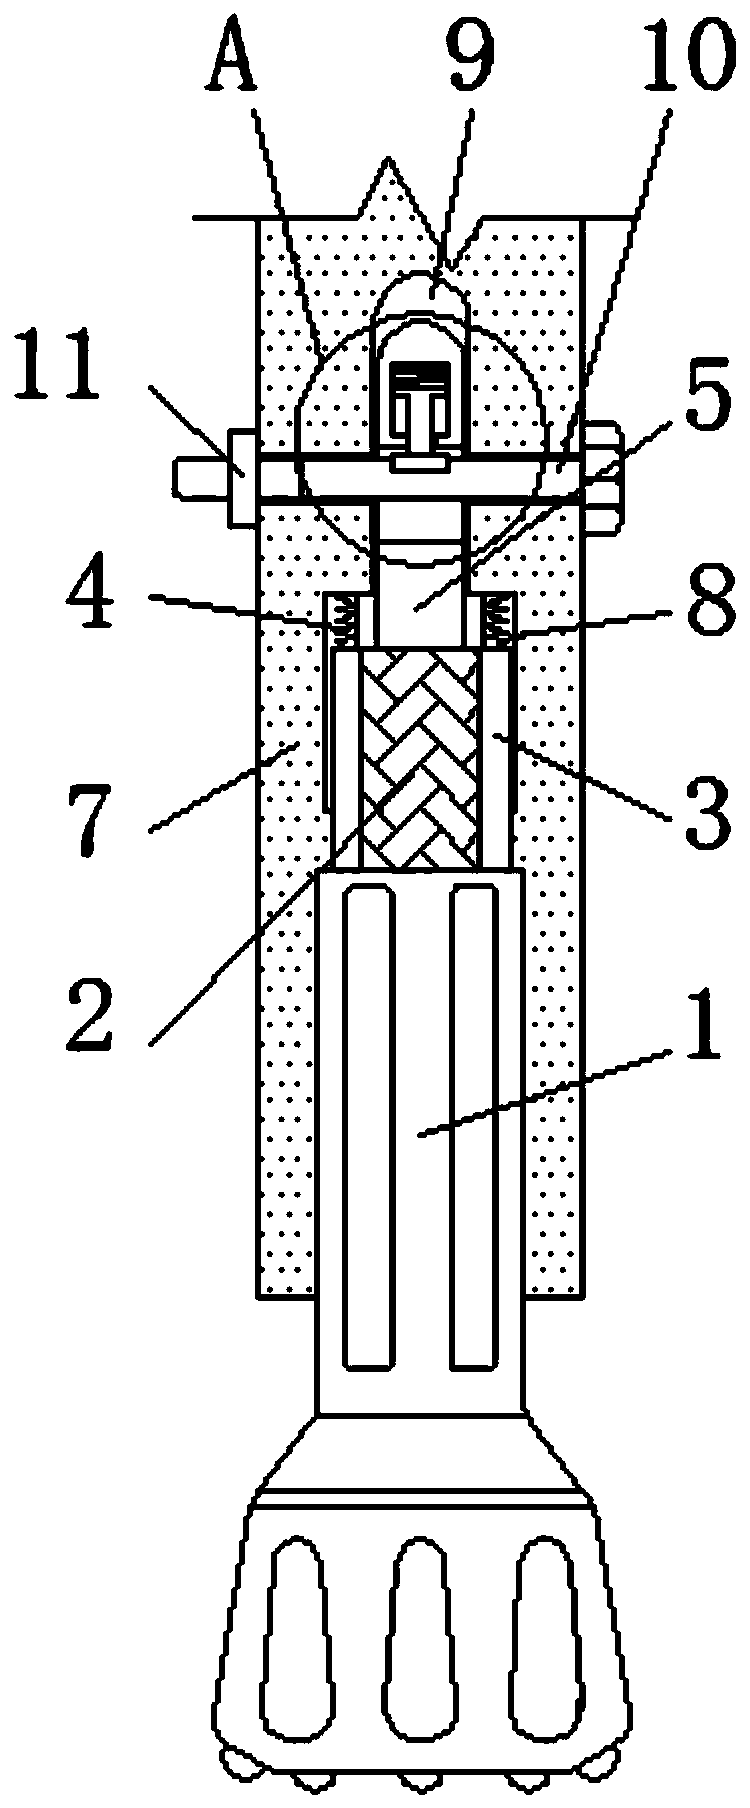 A mining drill bit with shock absorbing function